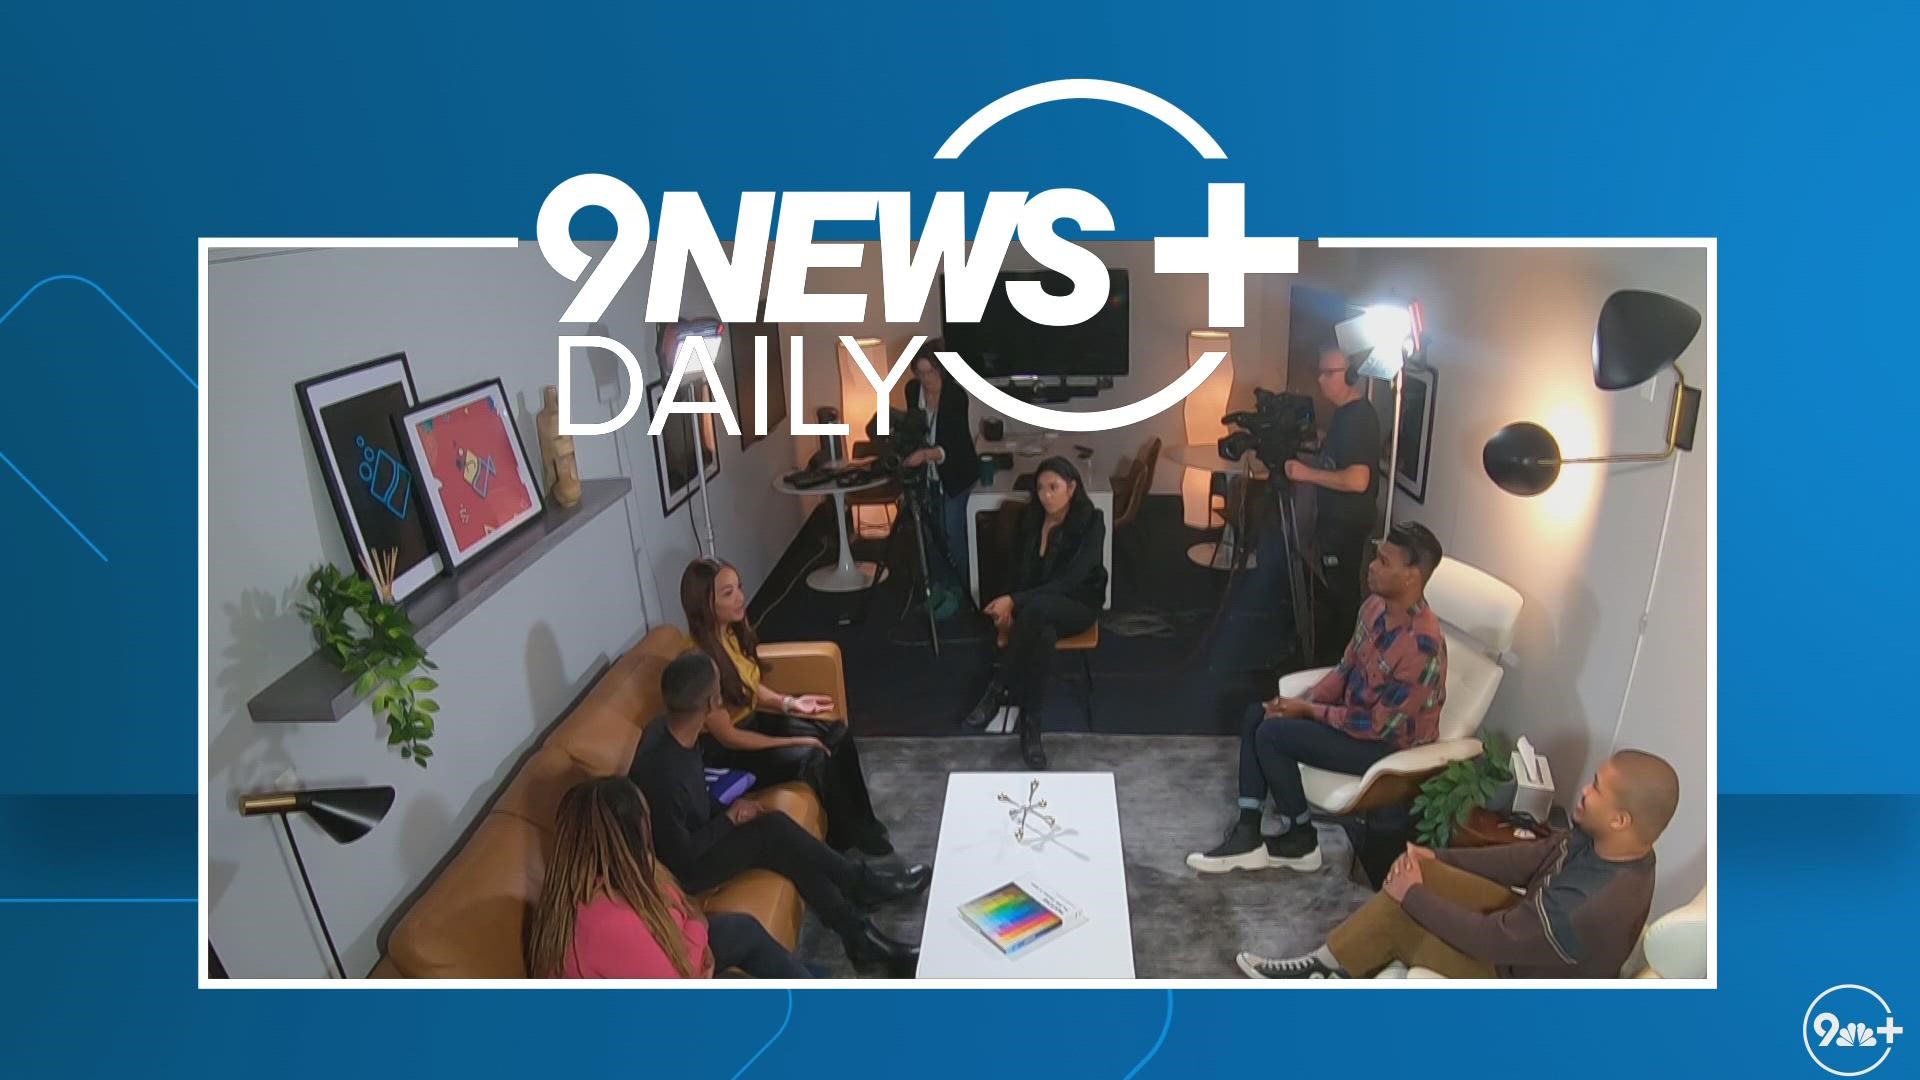 Earlier this month, the Black journalists at 9NEWS got together to have a conversation on representation, tokenism, code-switching and finding community in Denver.